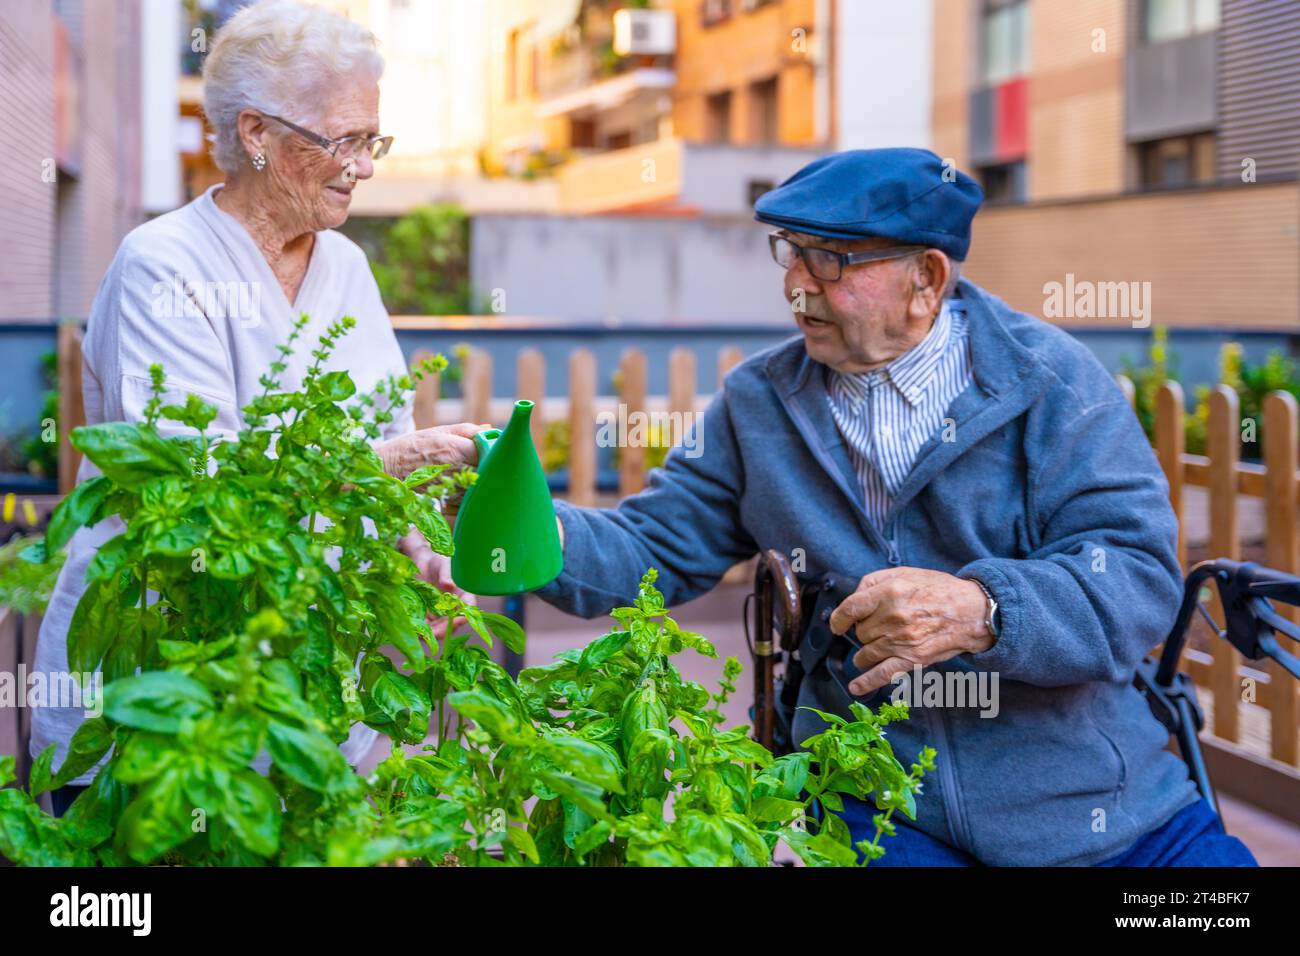 Elder man and woman watering herbal plants outdoors in an urban garden in a geriatric Stock Photo